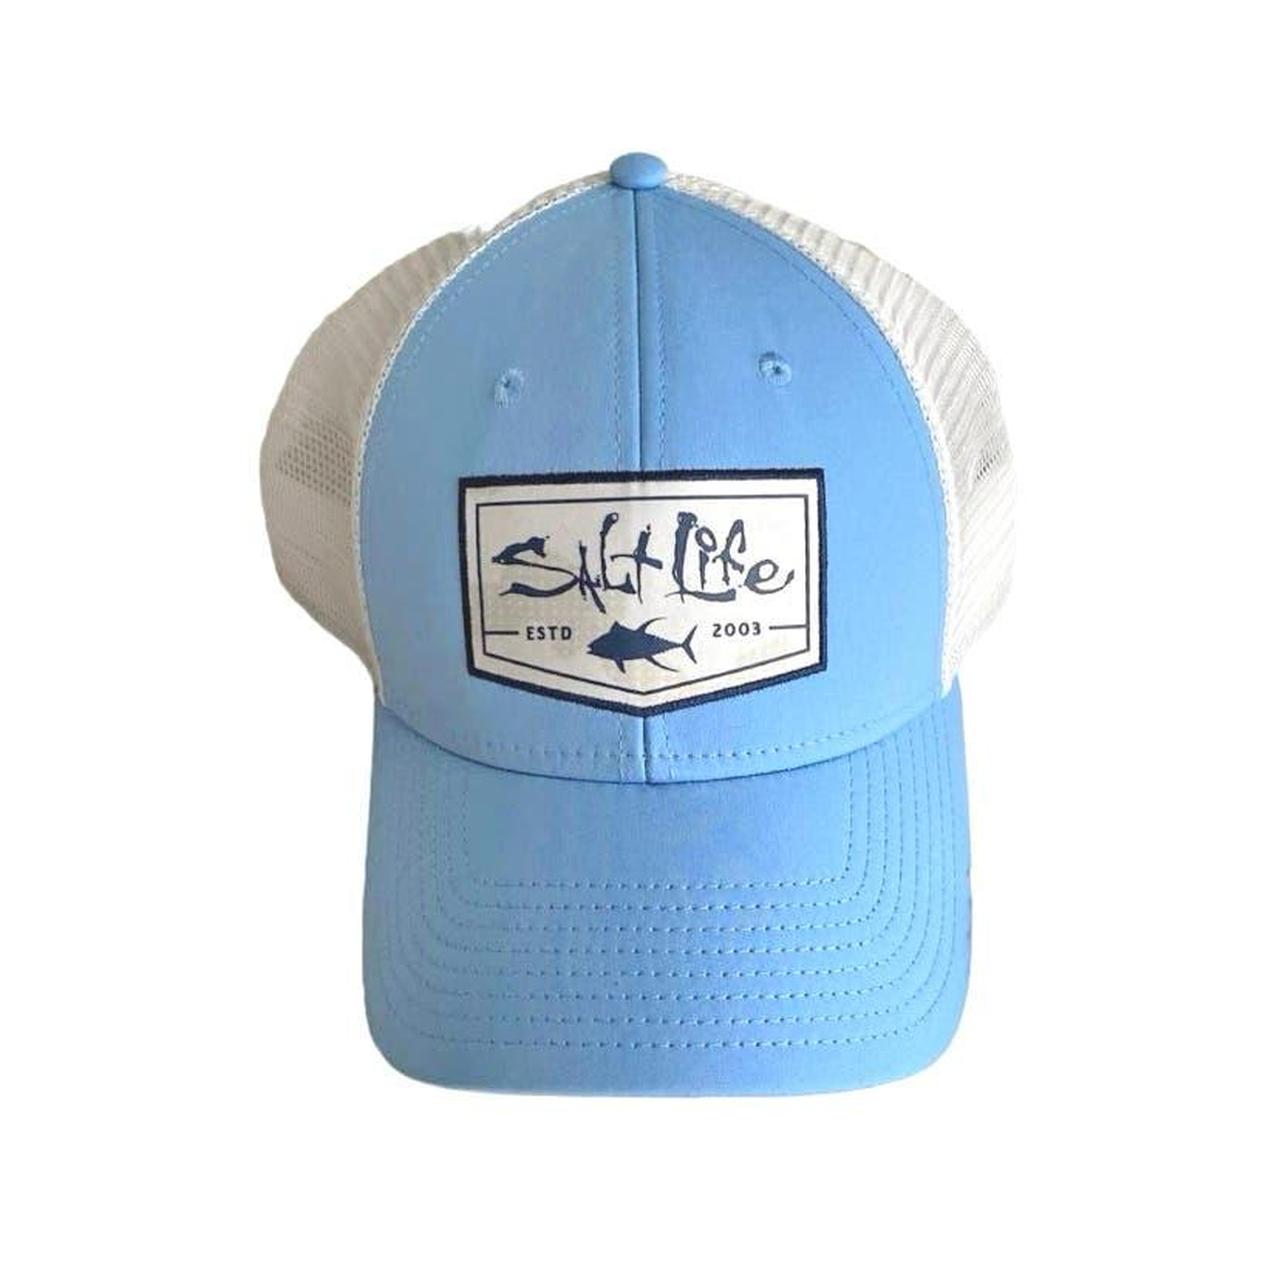 Salt Life men's caps and hats for fishing, diving, or surfing